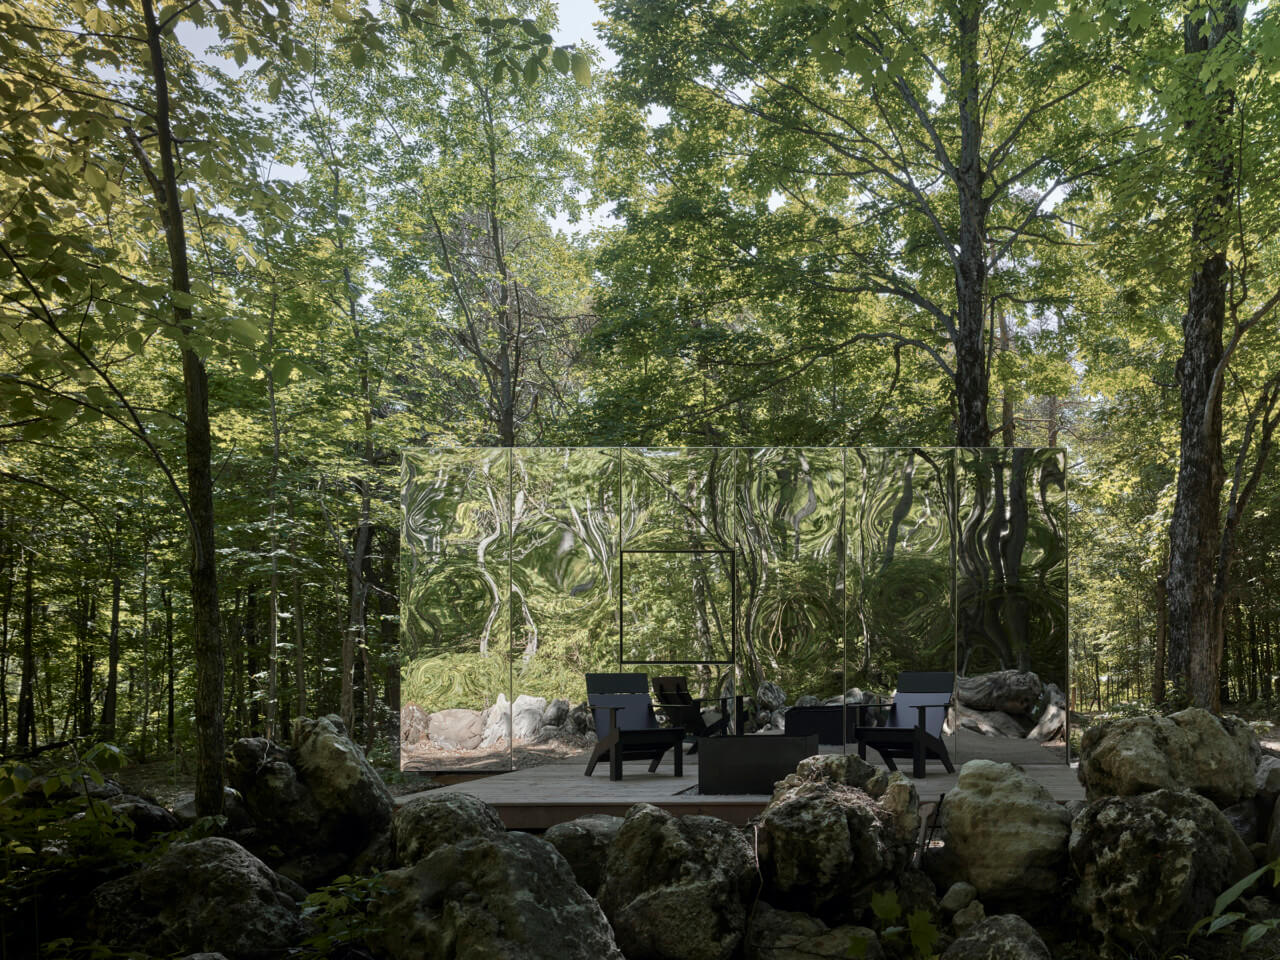 A mirrored cabin in the woods designed by Leckie Studio Architecture + Design